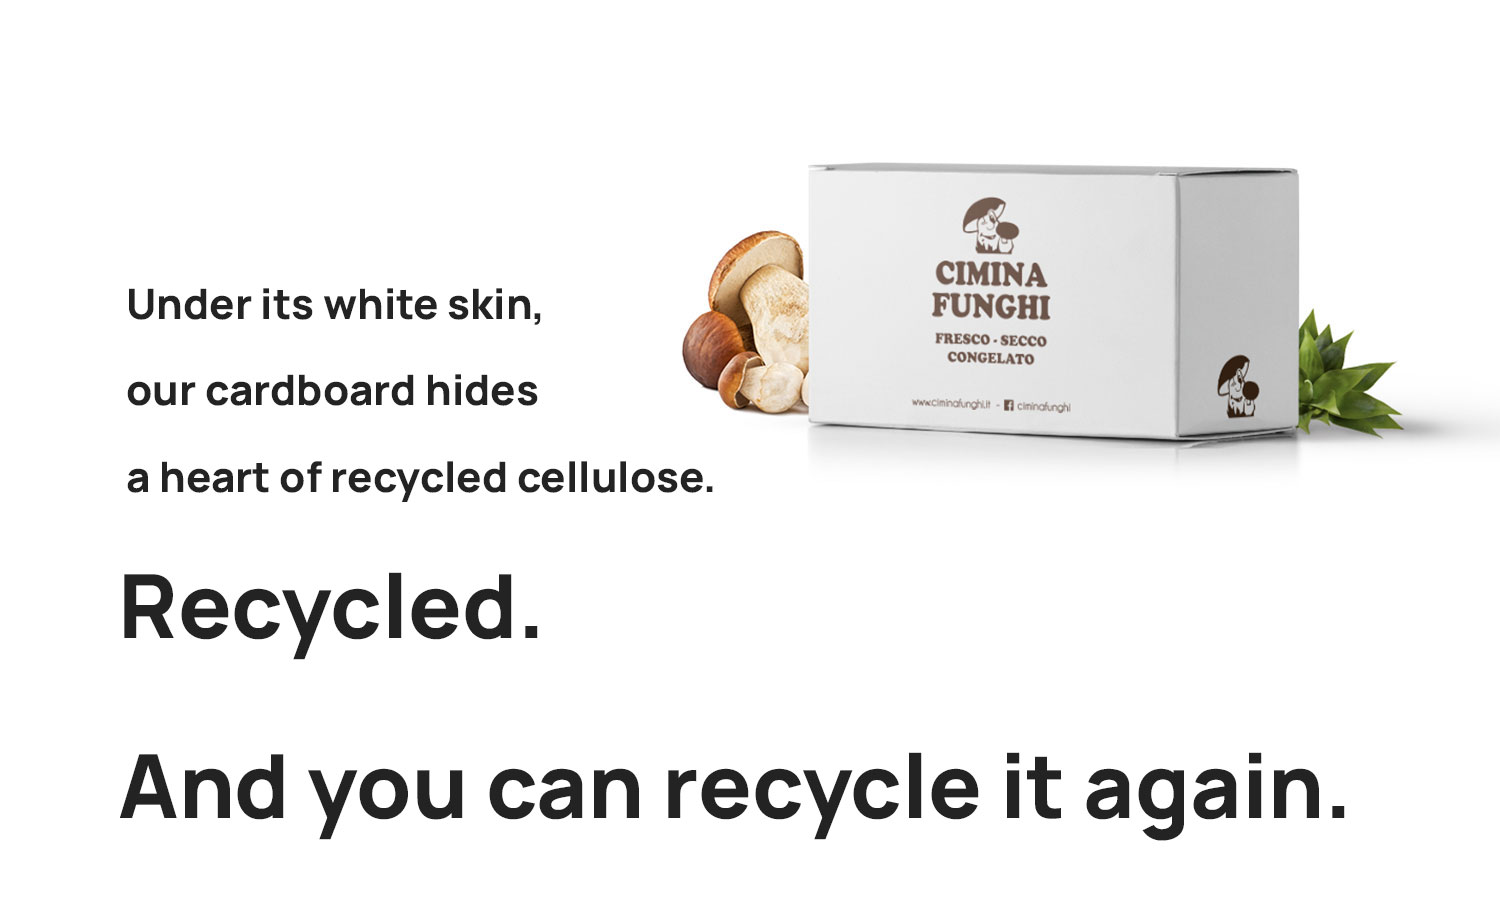 Cimina Funghi cardboard recycled and recyclable